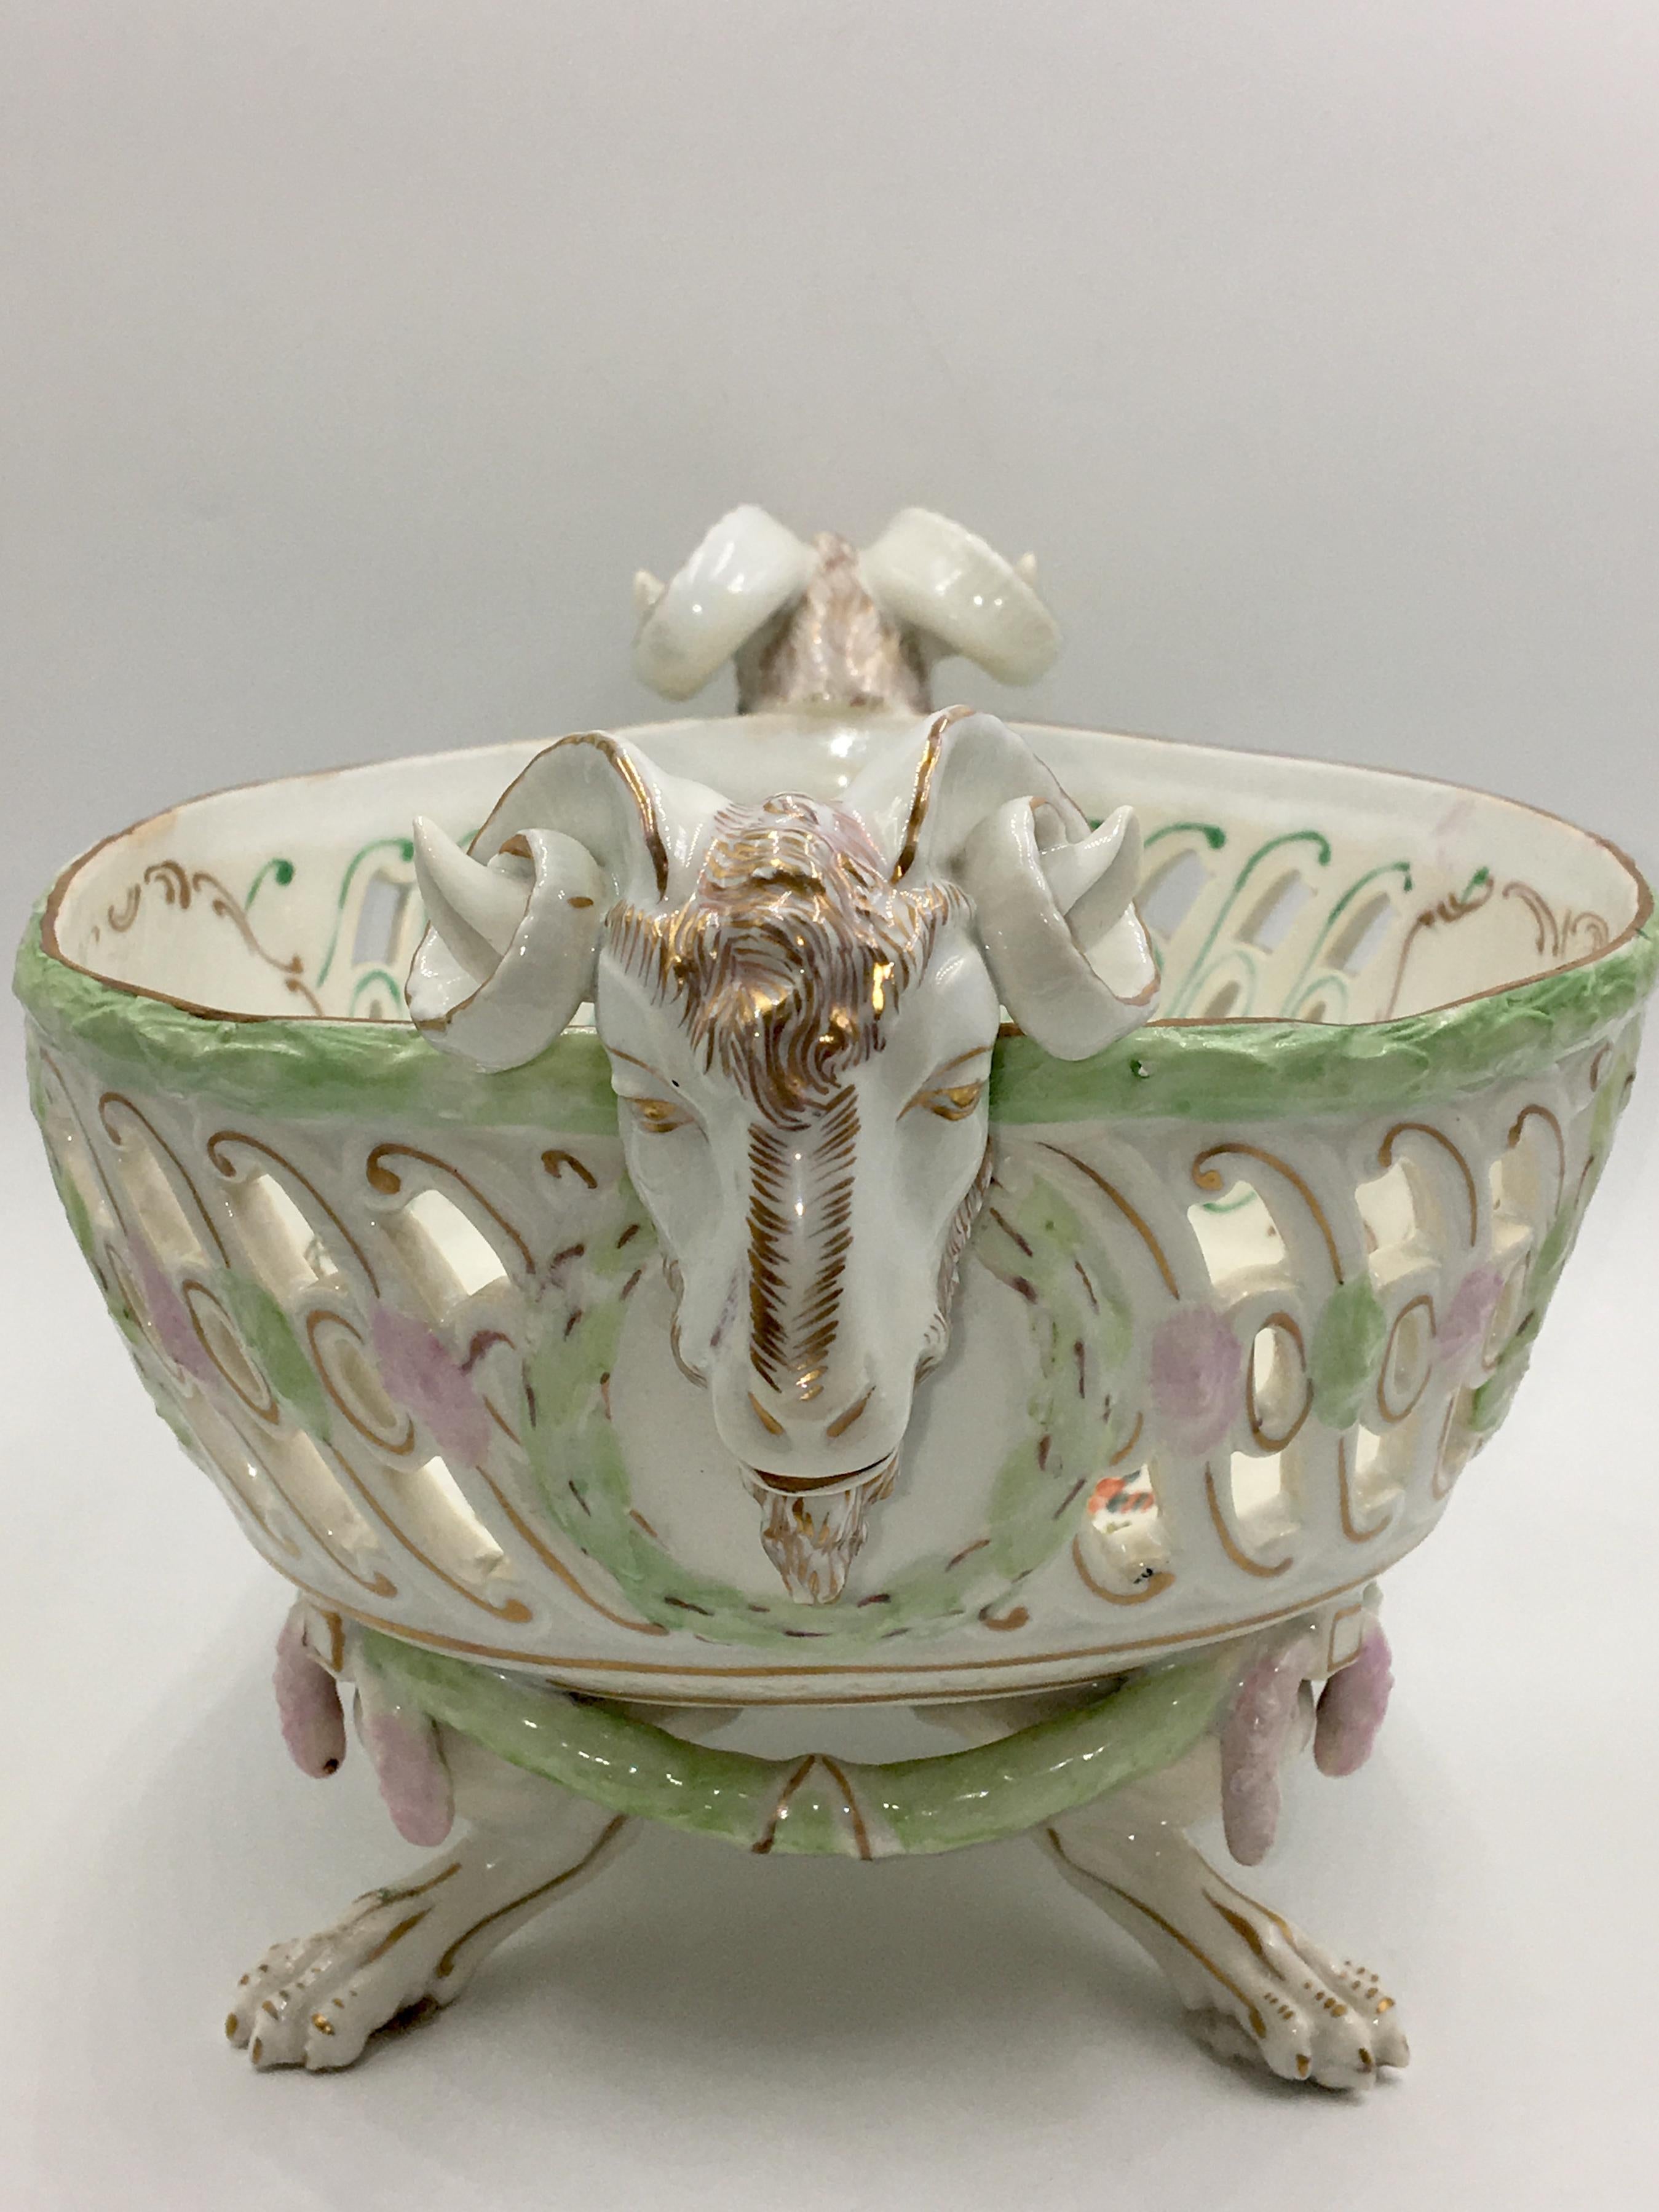 Rare pierced out display basket with 2 rams heads and 4 paw feet after a model of J.C. Schönheit from the 19th century. On the show sides and in the mirror flower decor.
Beautiful blue porcelain brand of Augarten, Vienna on the bottom.